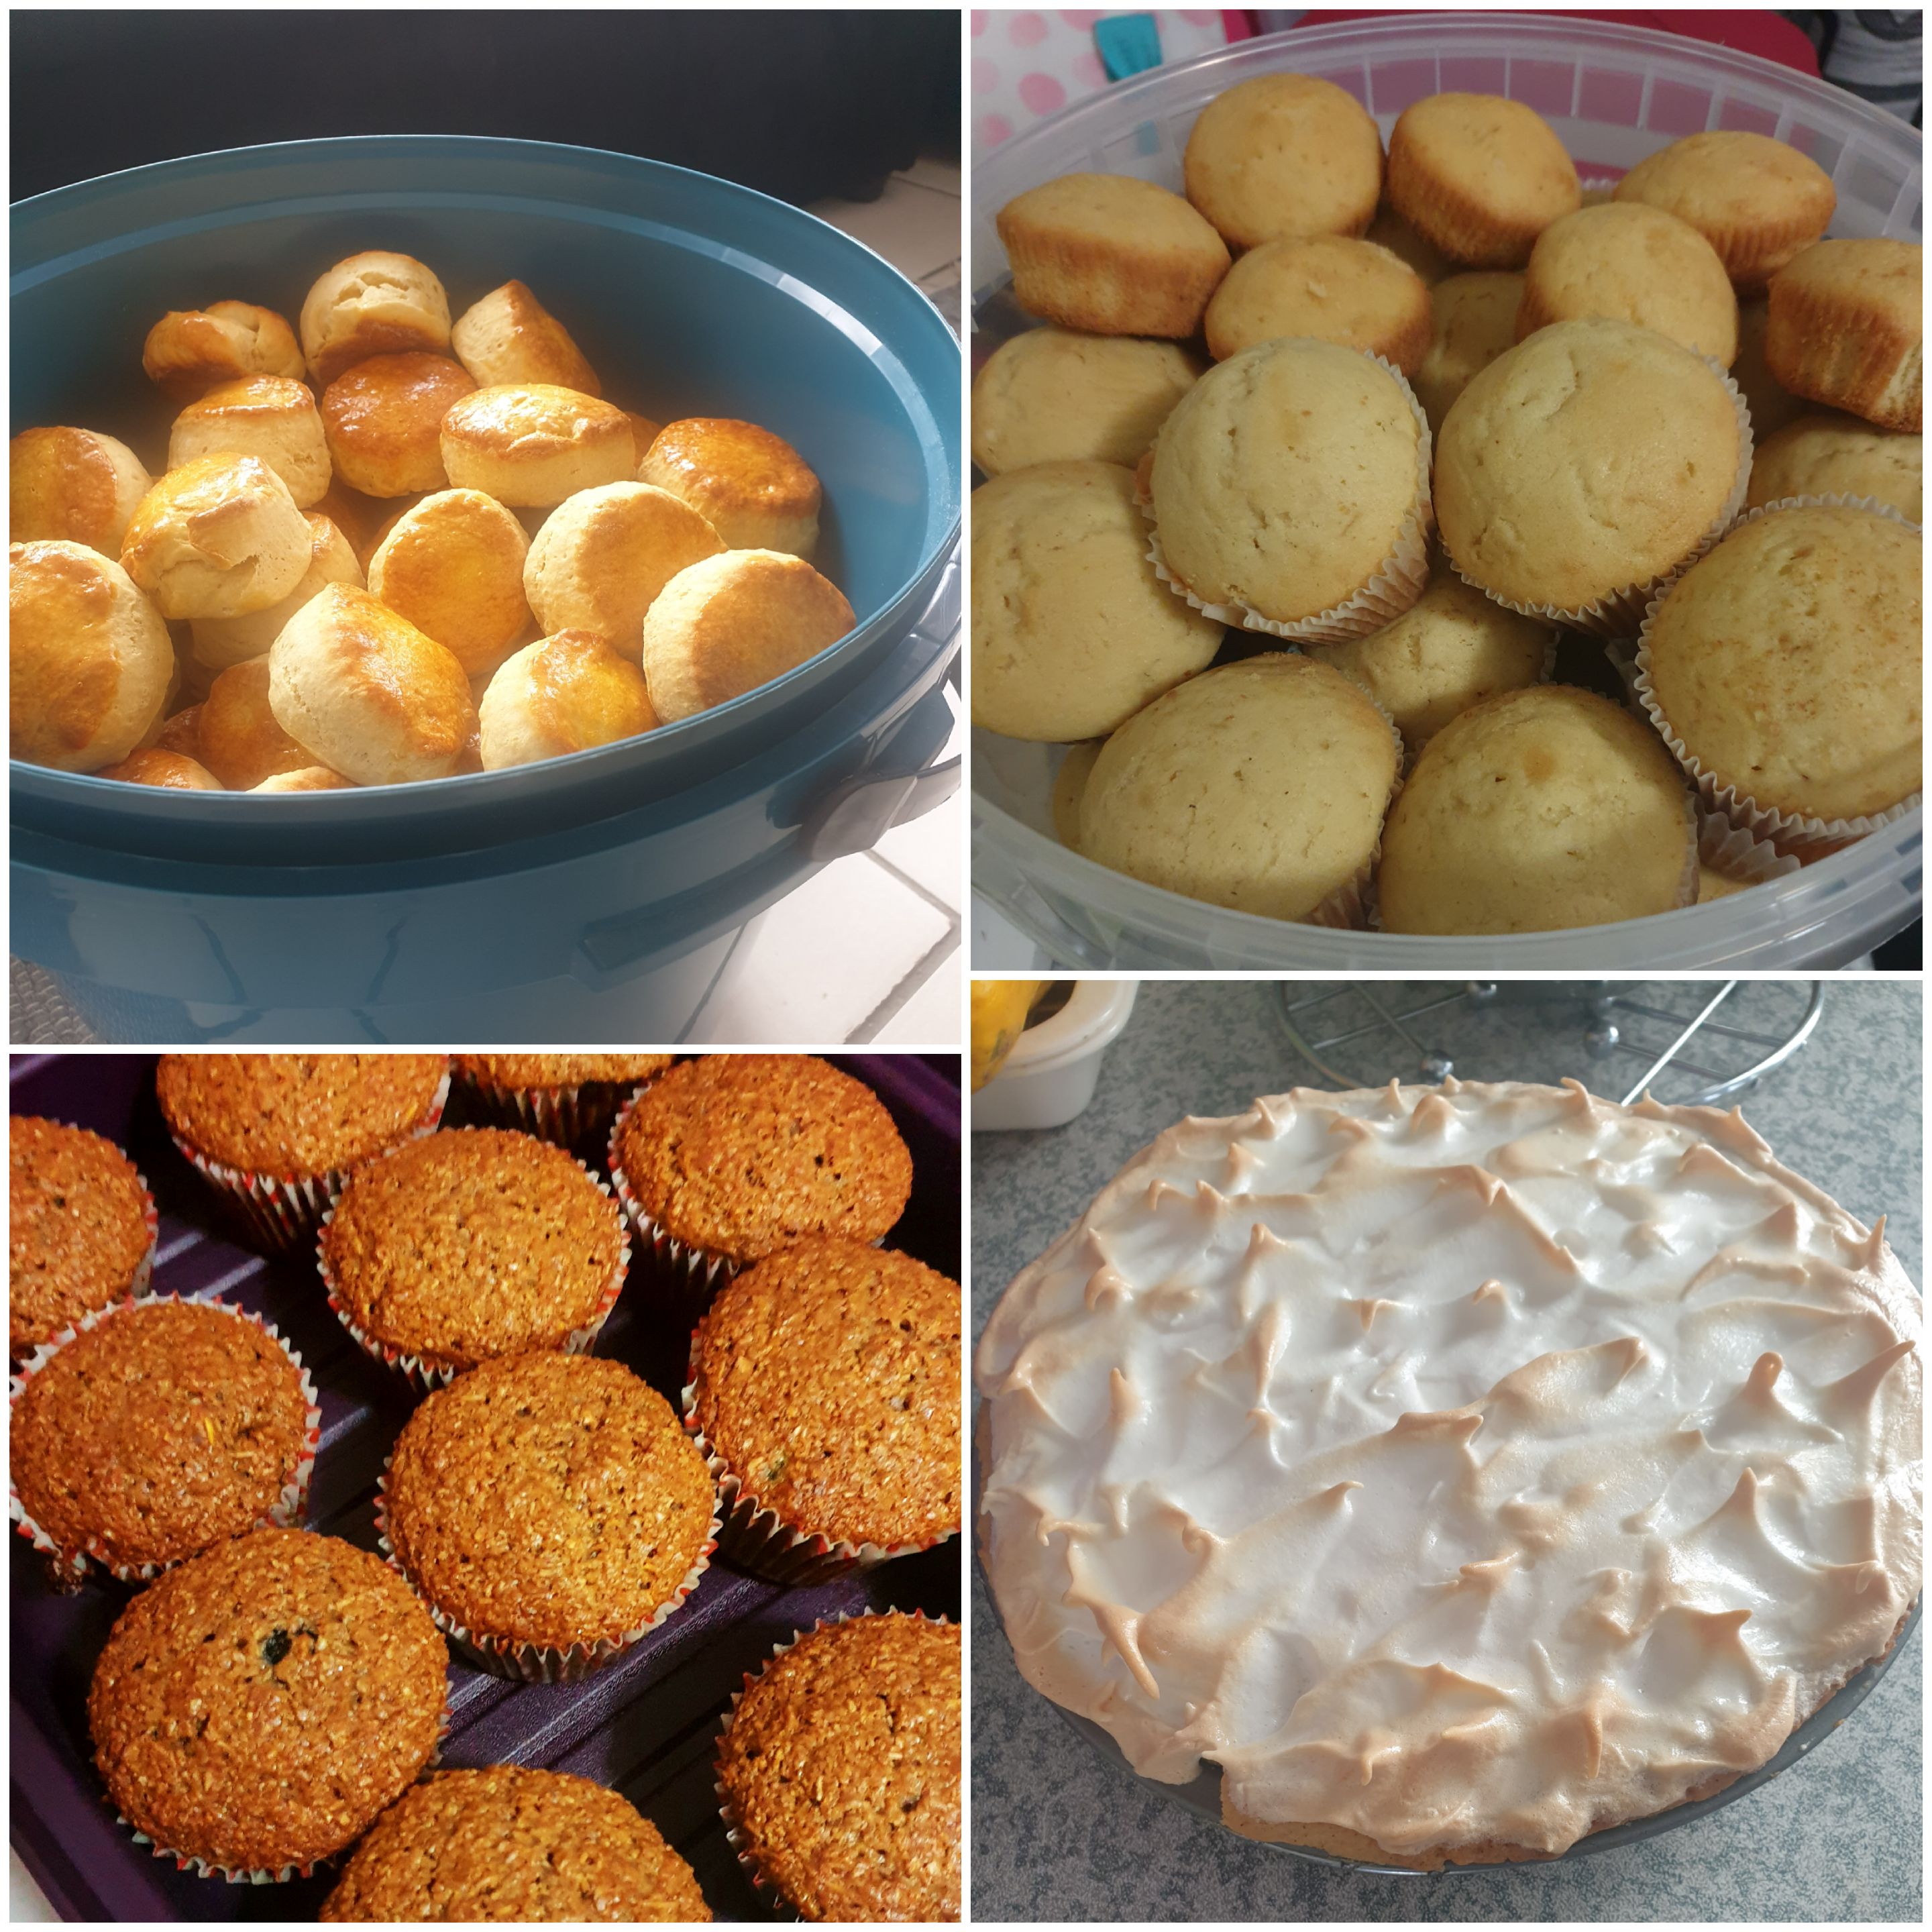 Scones, Muffins and desserts all freshly baked